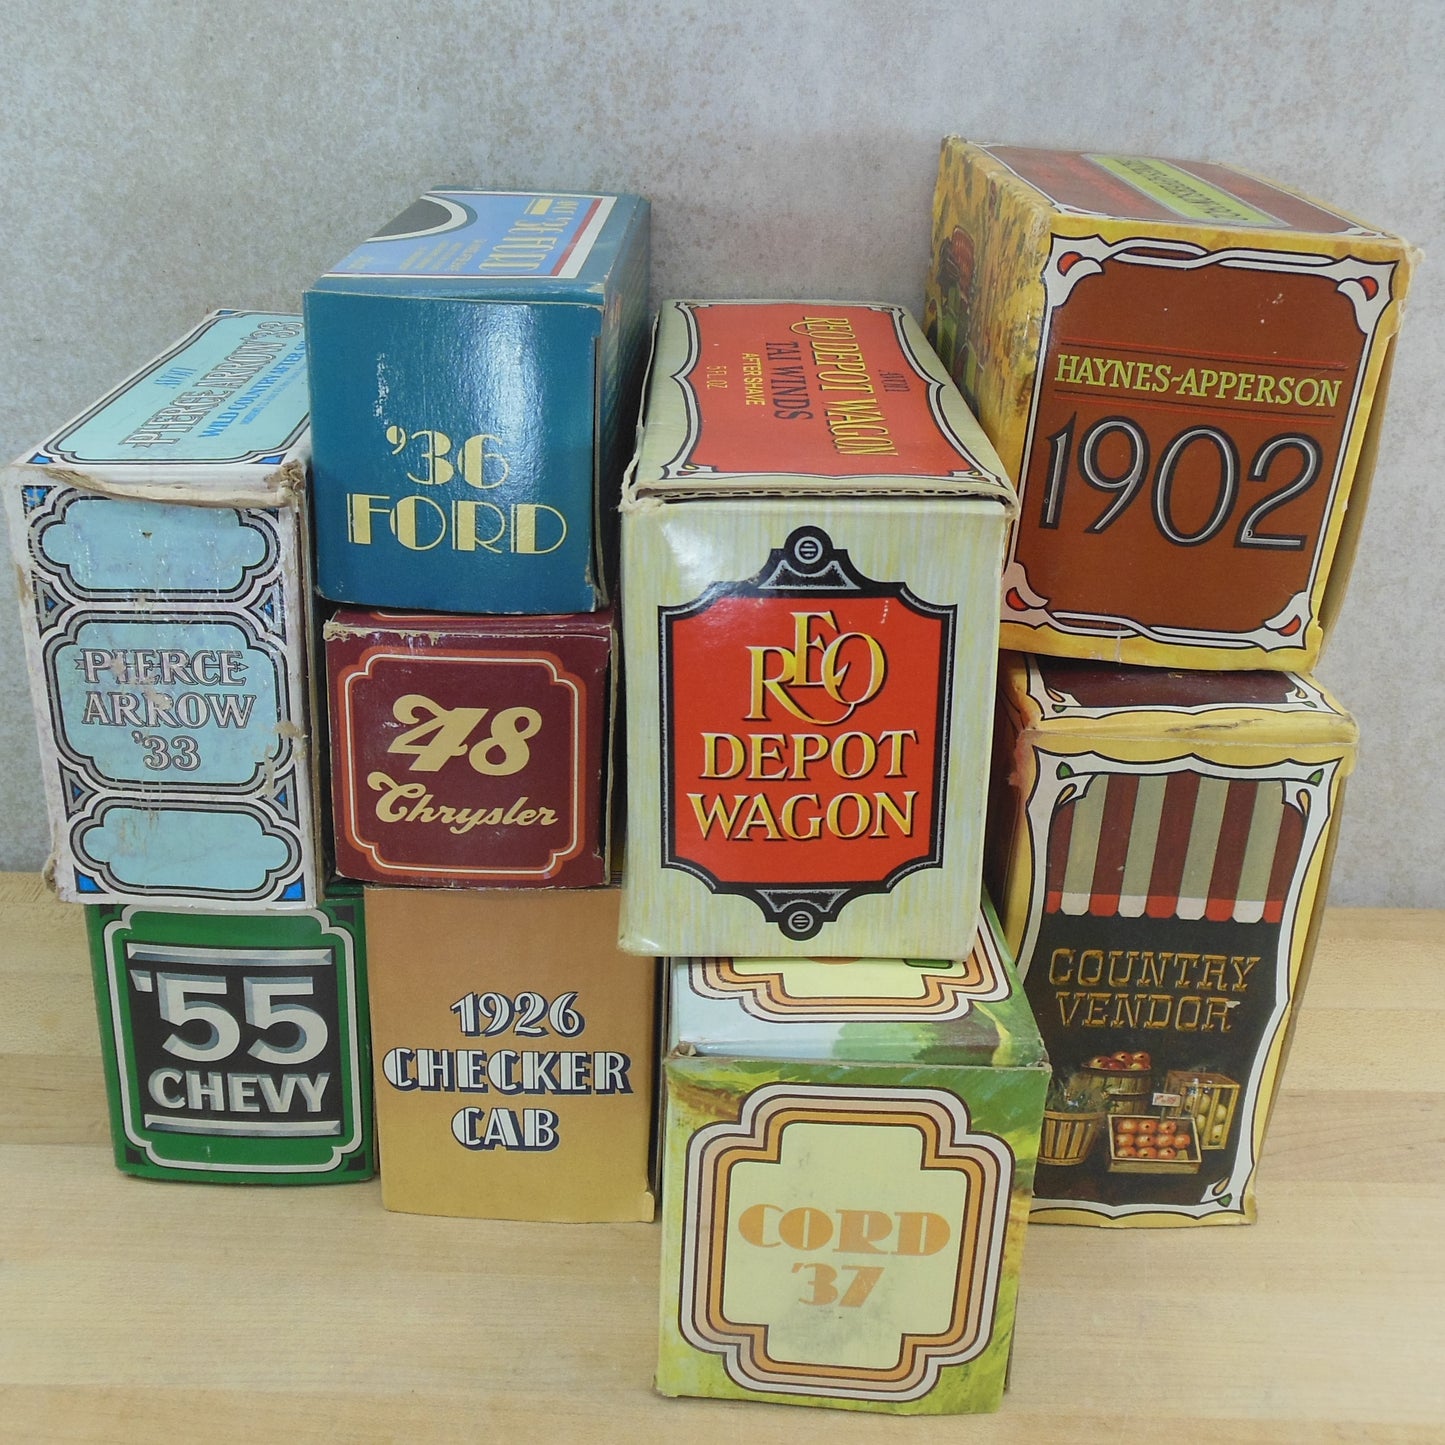 Avon Aftershave Bottles Boxed 9 Lot - Cars Ford Chevy Pierce Arrow Chrysler REO Cord Vintage